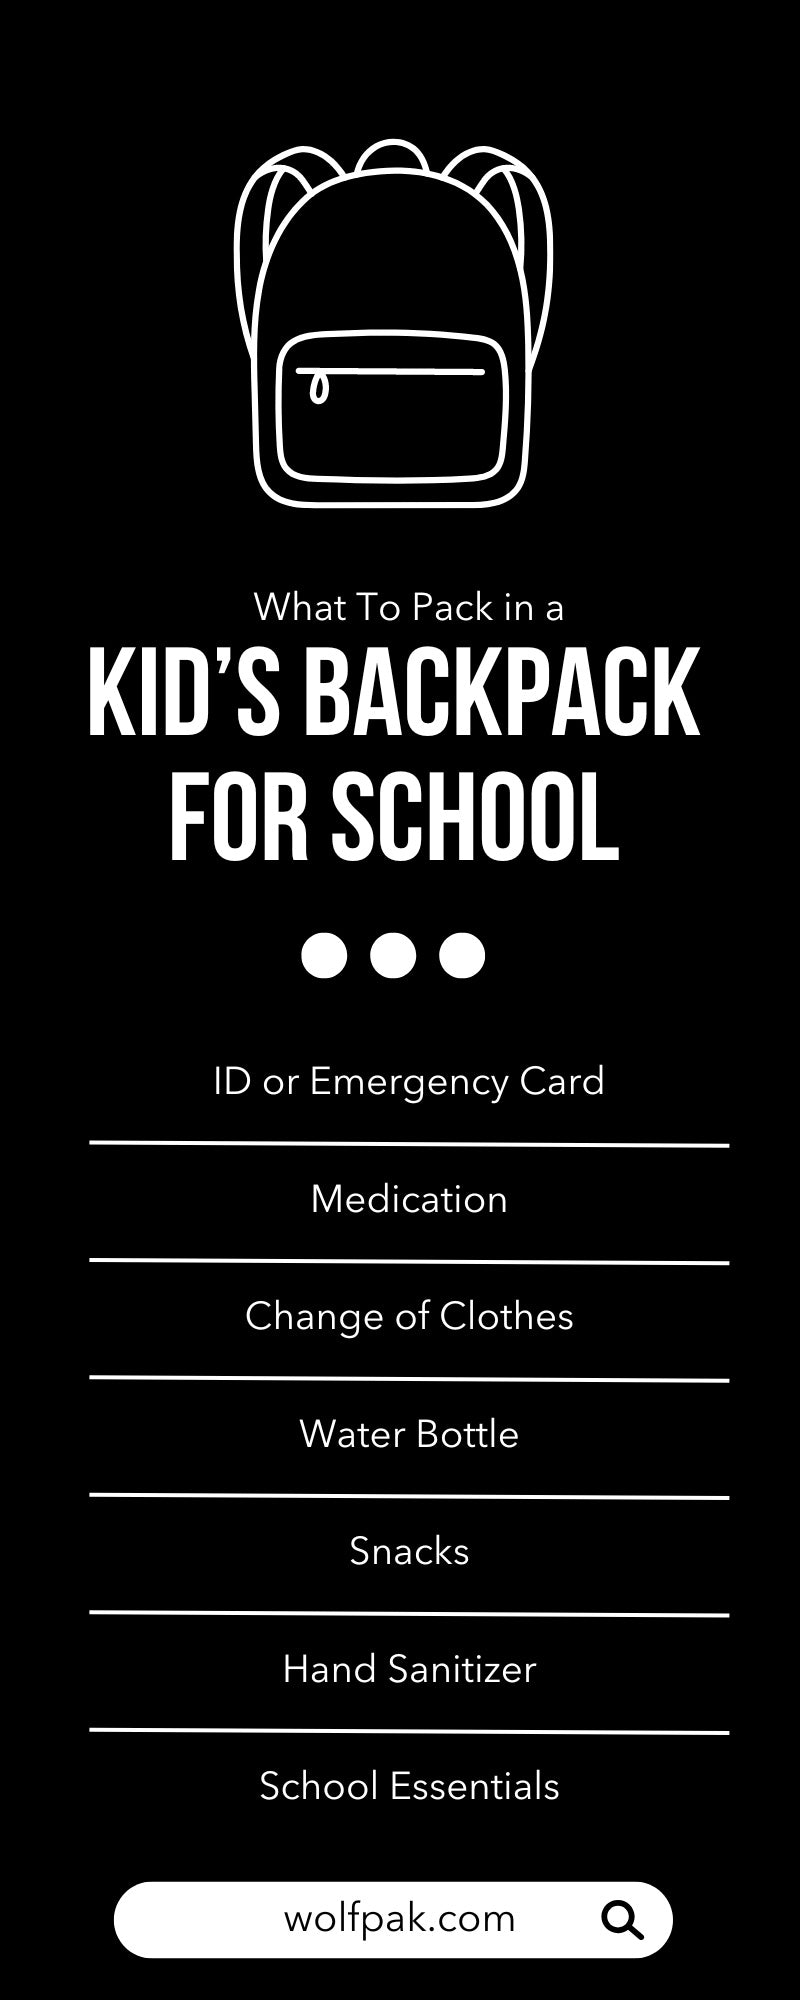 What To Pack in a Kid’s Backpack for School